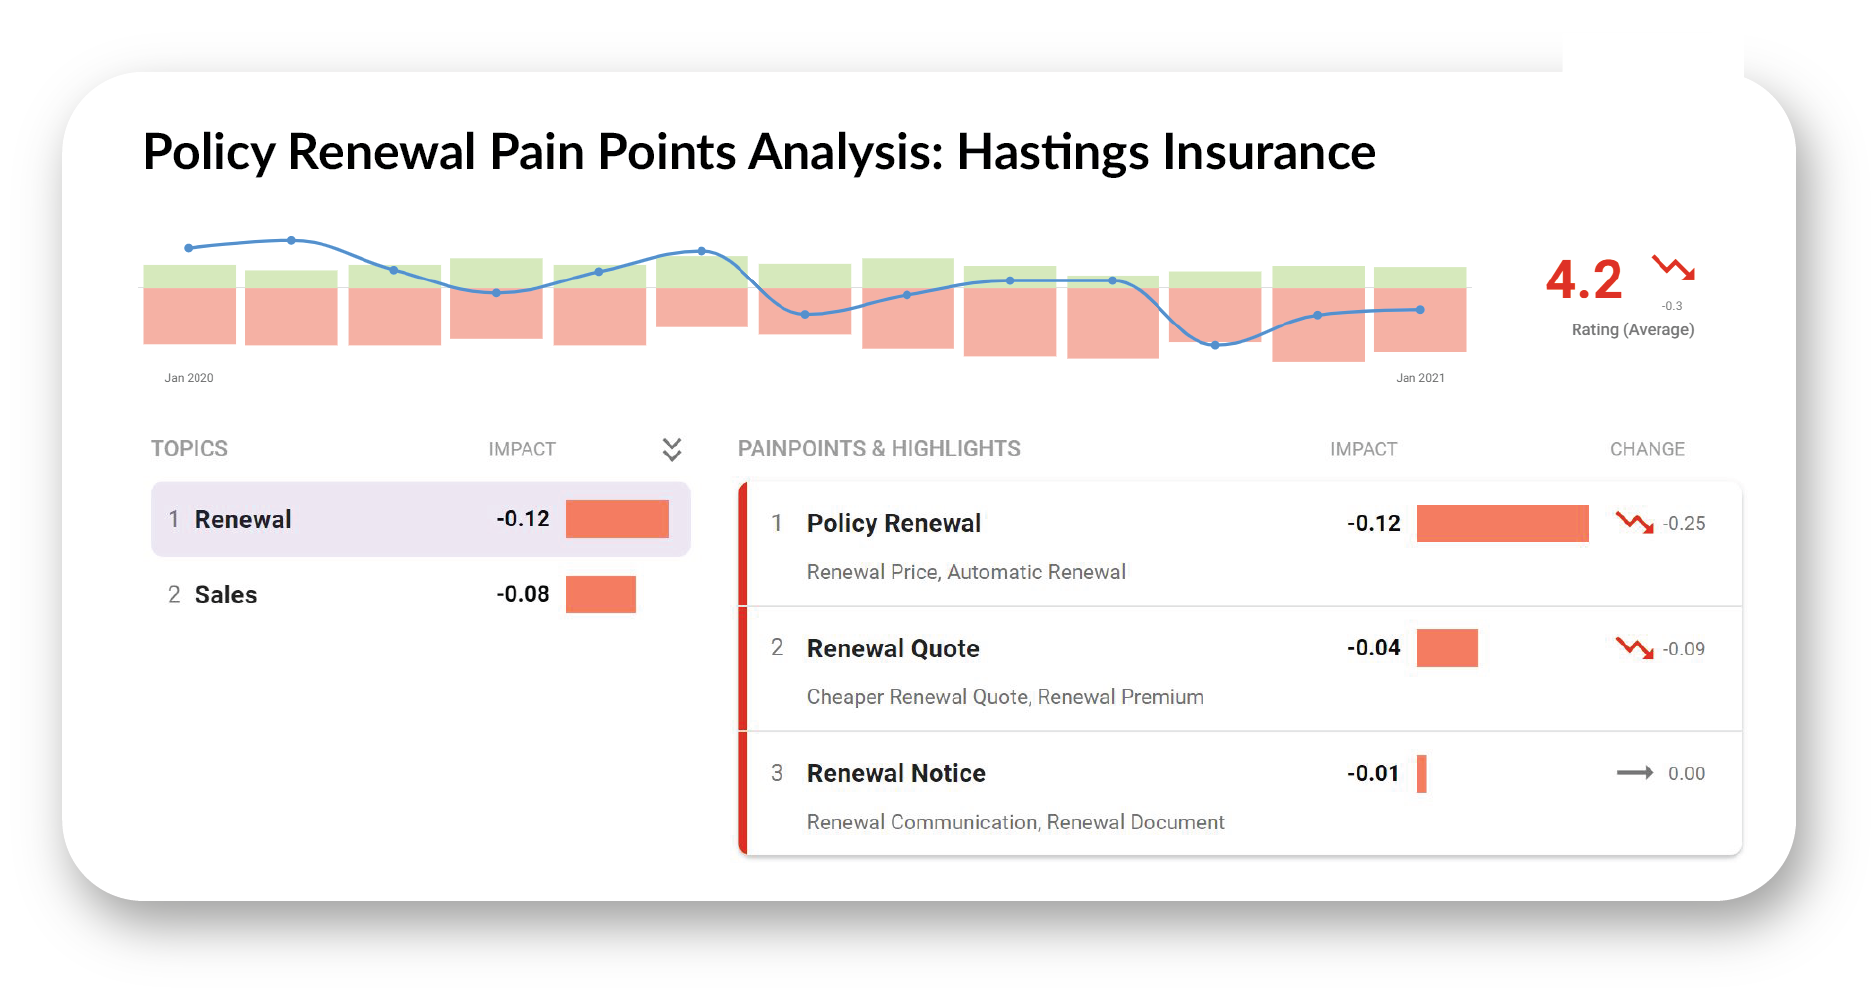 Policy renewal pain point analysis for hastings insurance